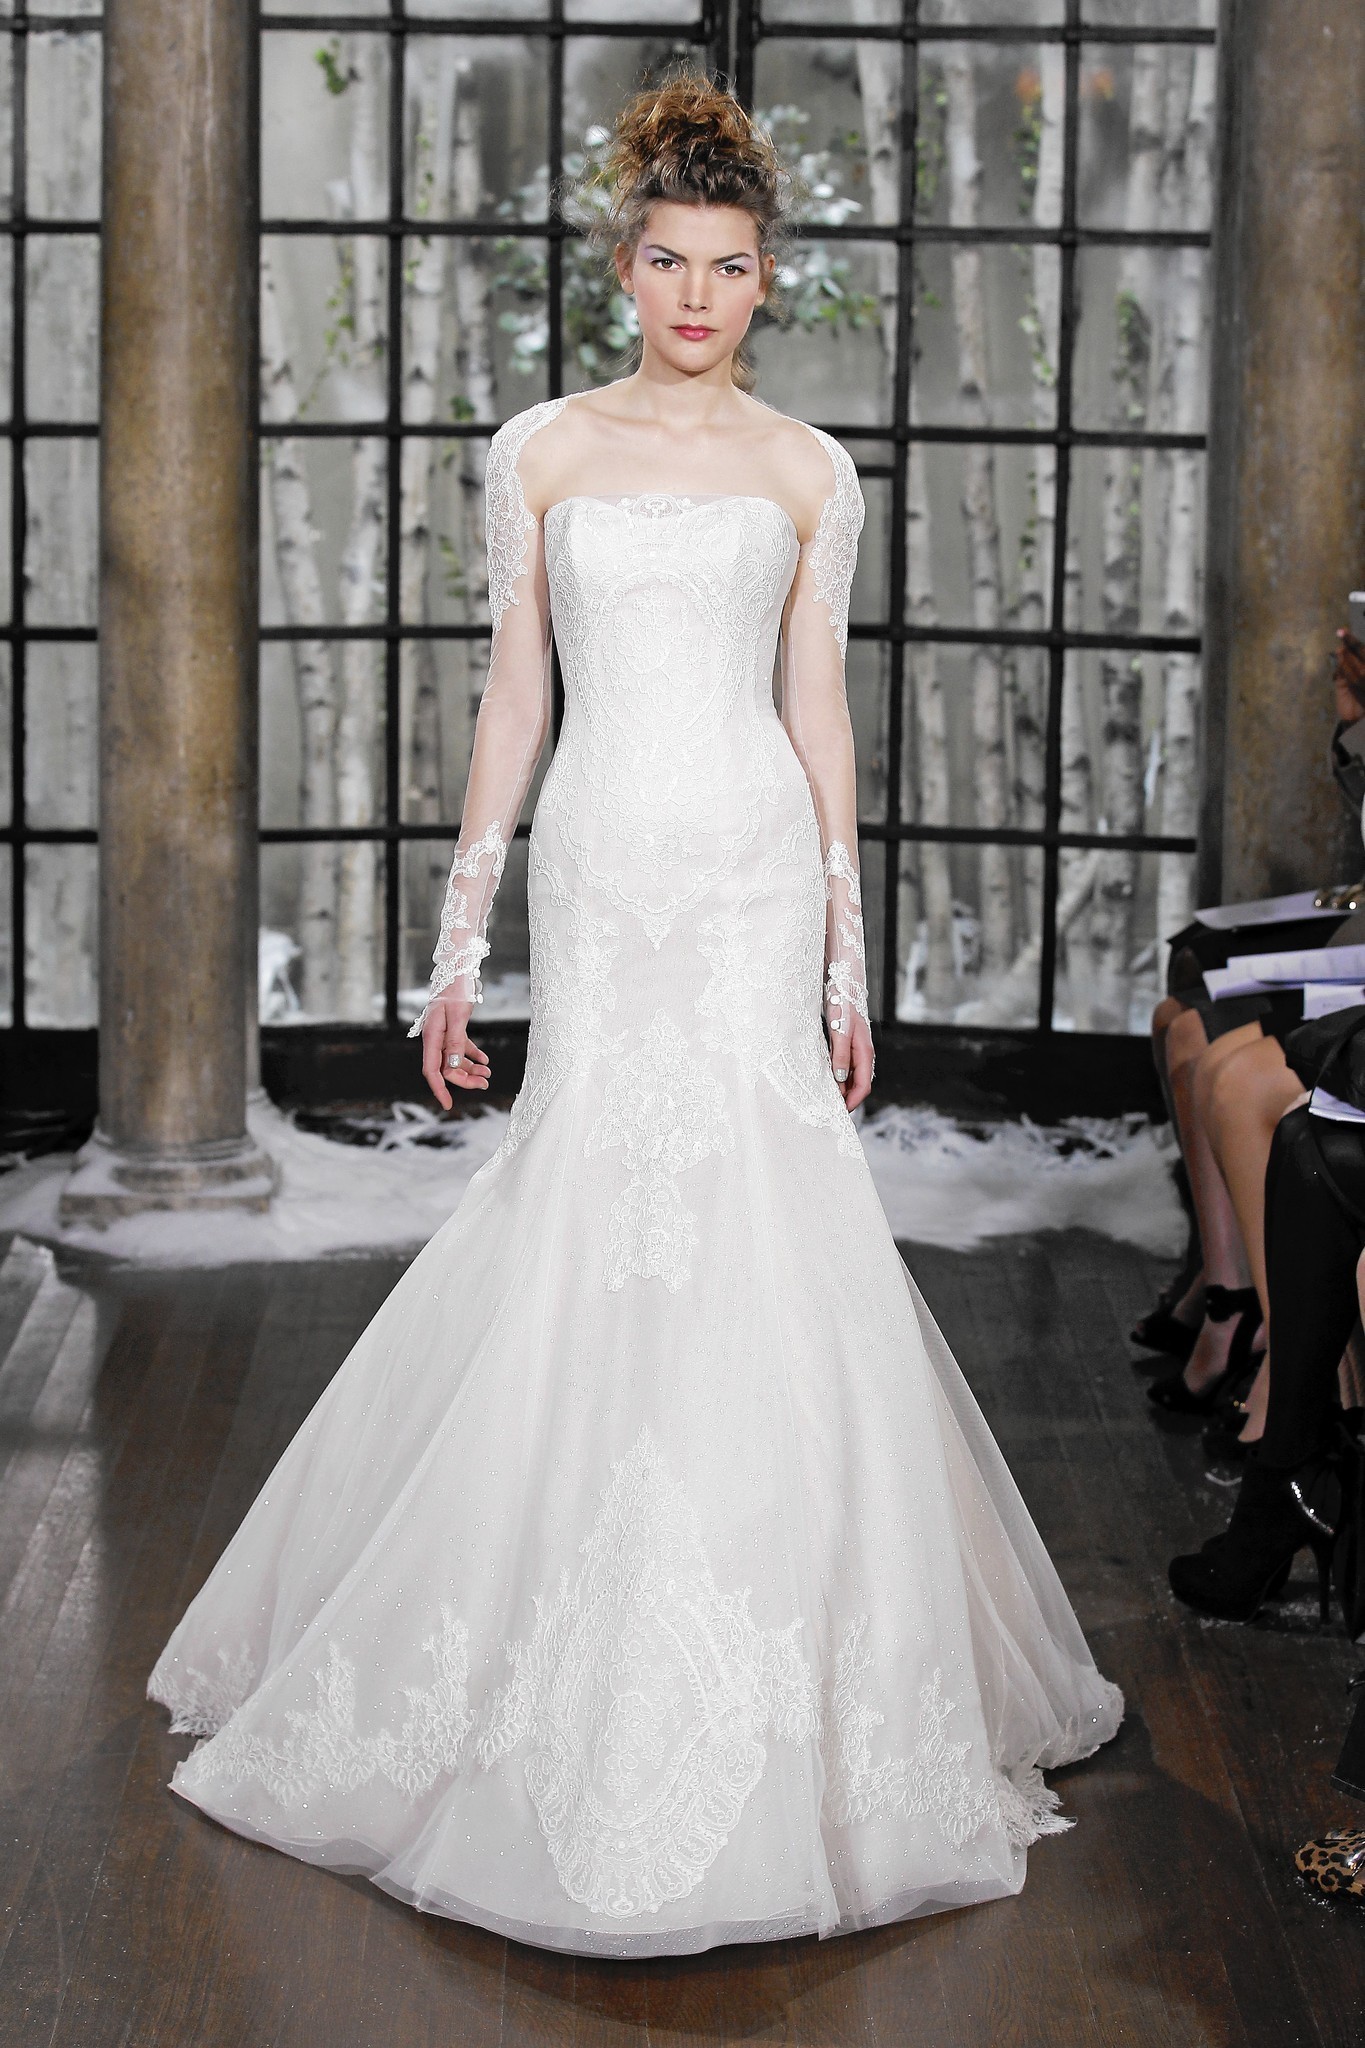 2015 brides love lace, sleeves, soft colors for wedding gowns - Lake ...